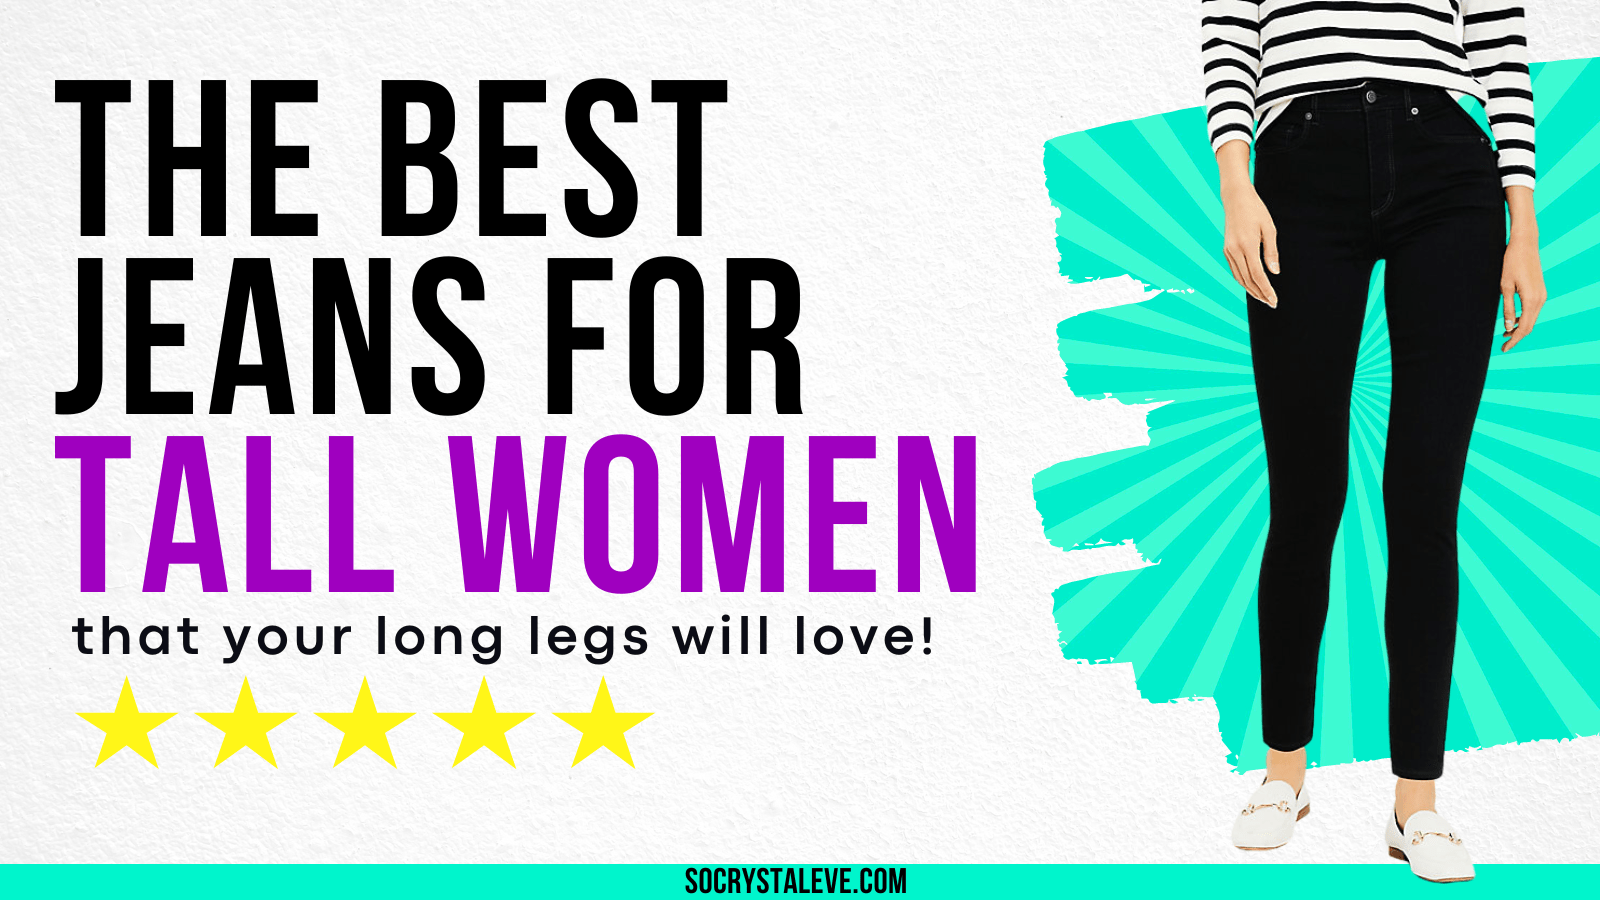 5 Best Jeans for Tall Women that your Long Legs will Love! 😍